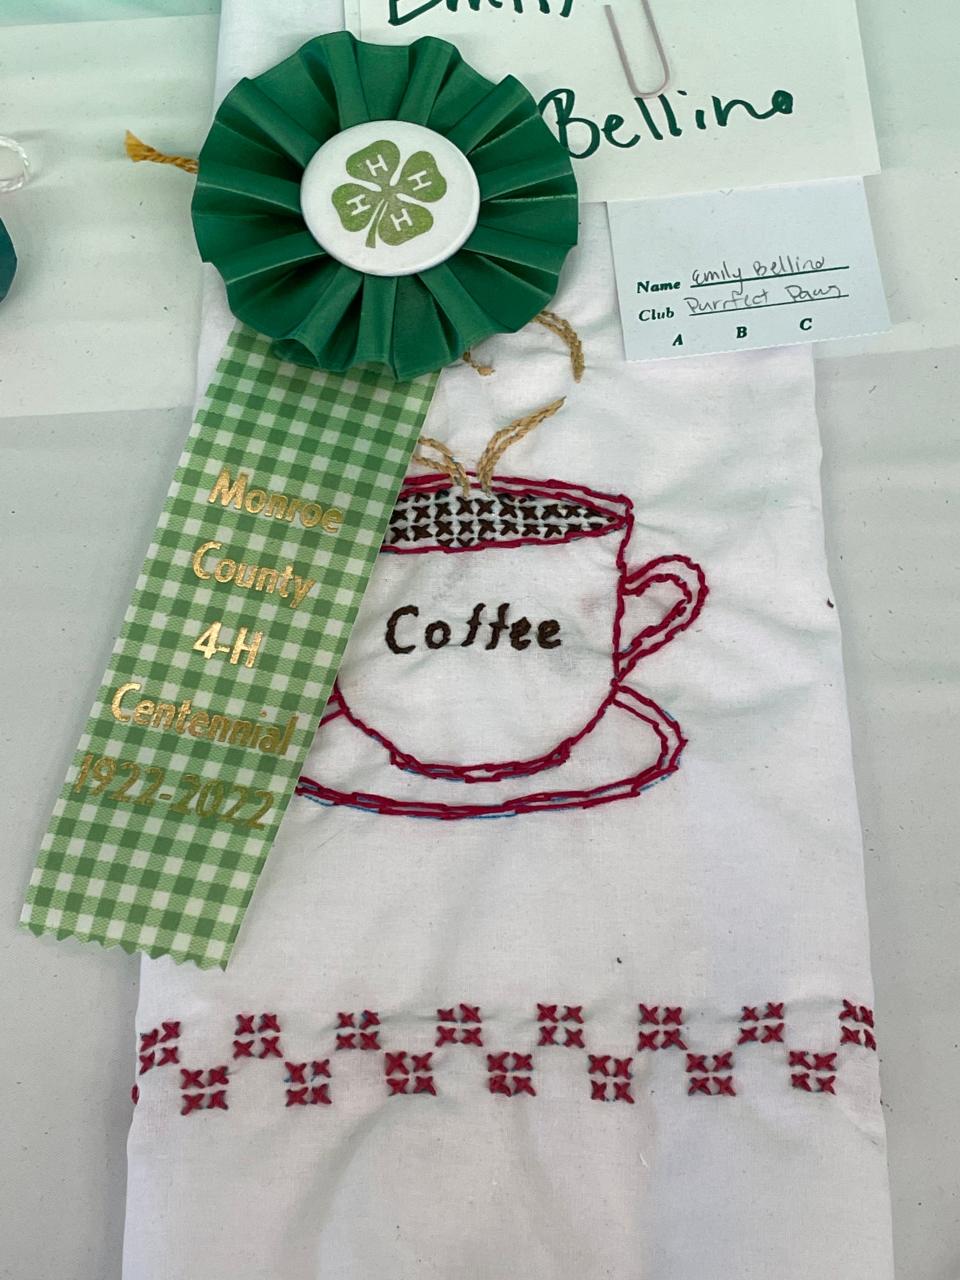 Emily Bellino entered an embroidered towel in the fair. All Centennial Projects received a special Centennial Ribbon.